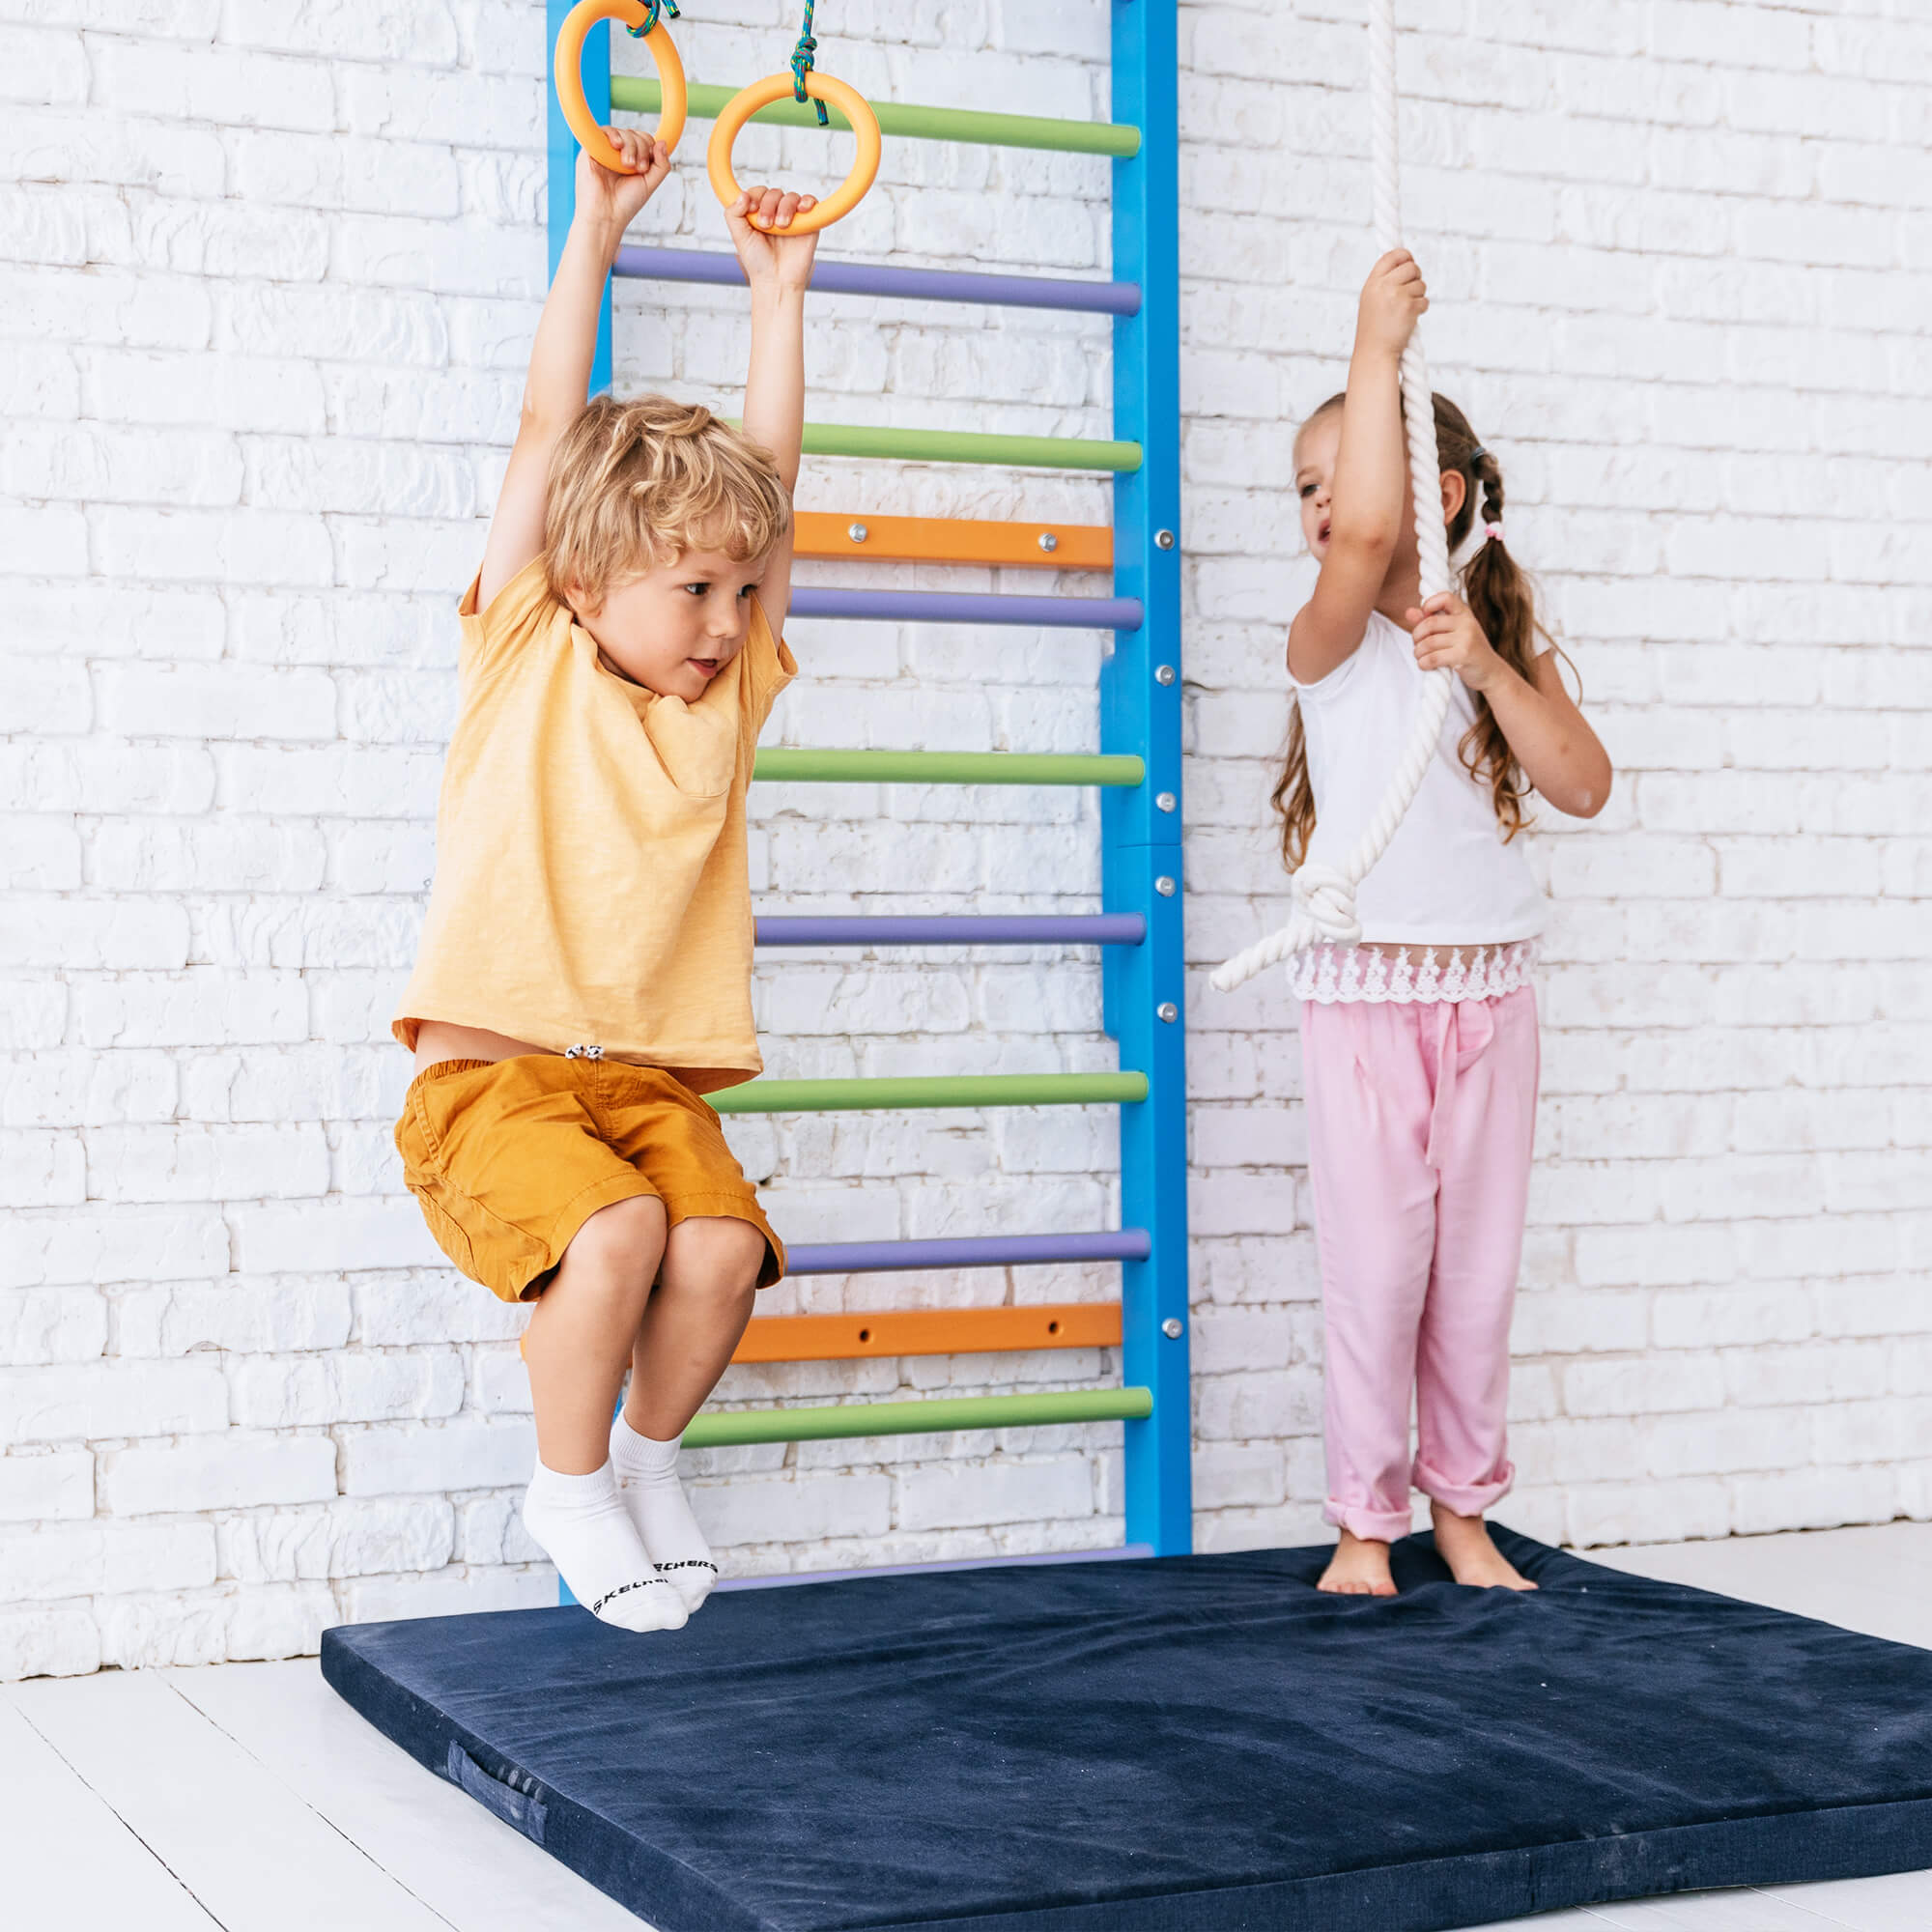 Ladder Wall - Climbing Products - Balance Products